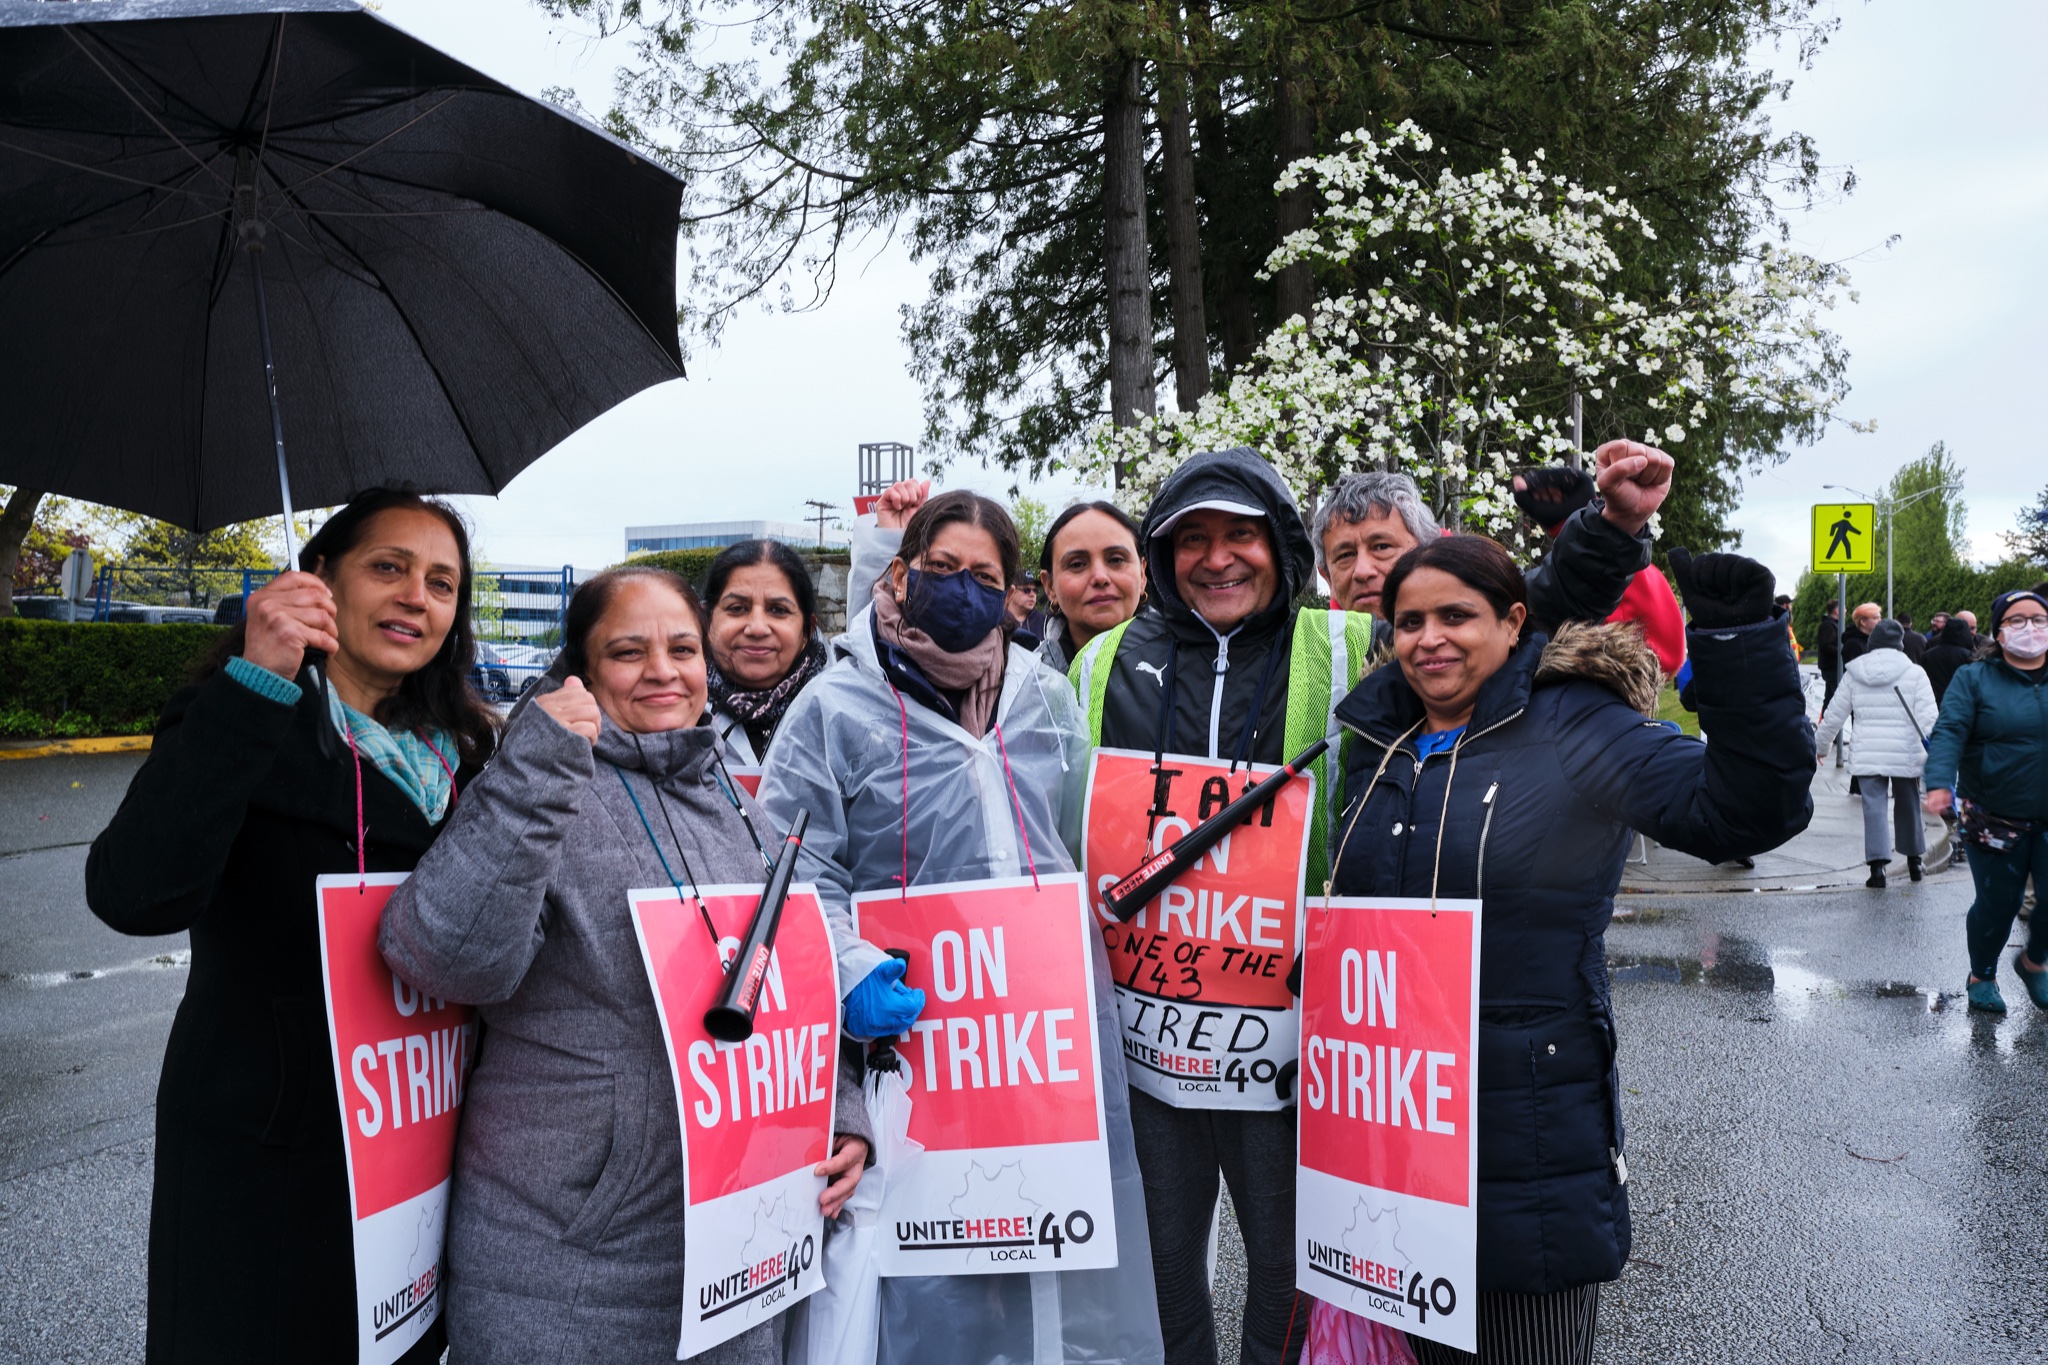 OPINION: Why Local Area Residents are Striking to Change the Hotel Industry’s Treatment of Workers During COVID-19?